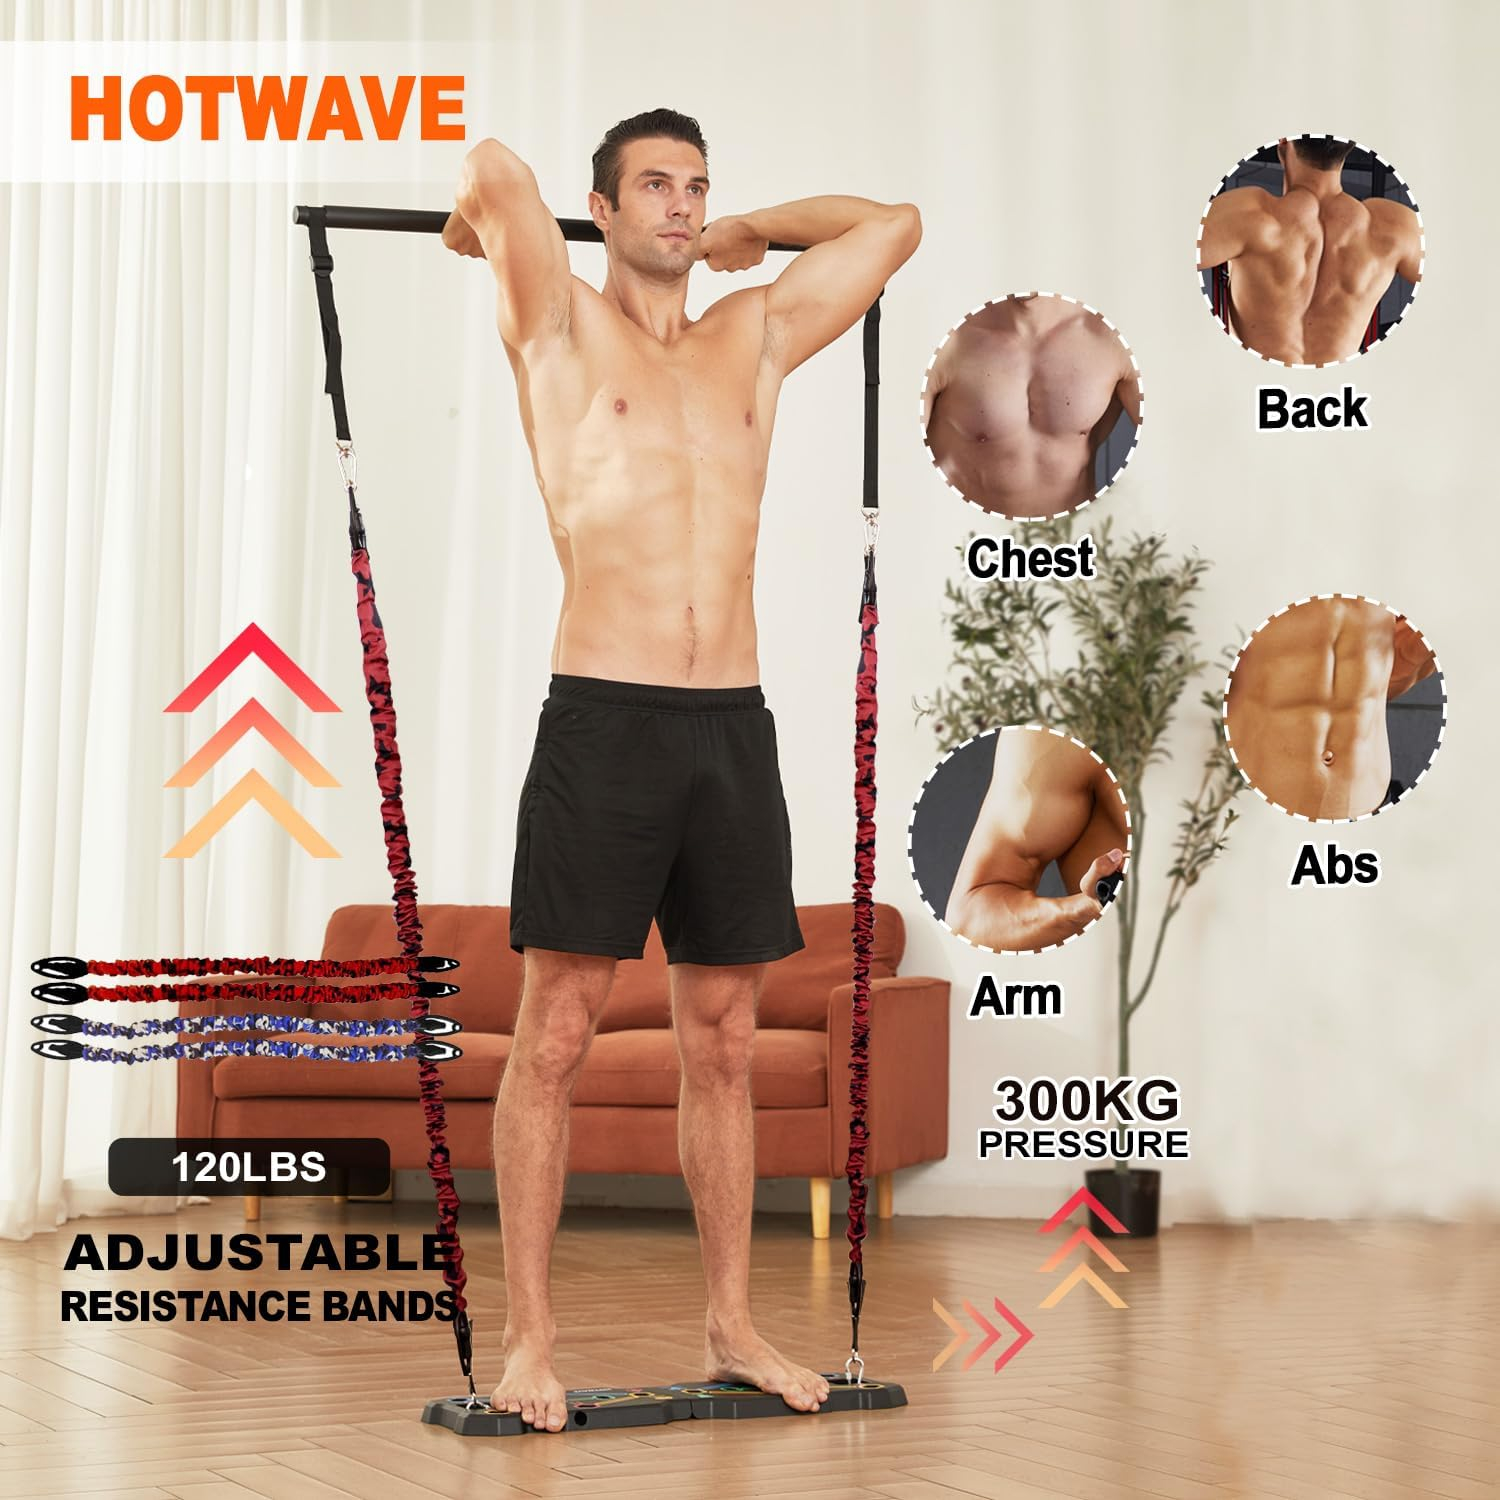 HOTWAVE Portable Workout Equipment with 20 Gym Accessories.Push Up Board Plank,Resistance Bands with Ab Roller Wheel,Full Body Exercise at Home For Men and Women